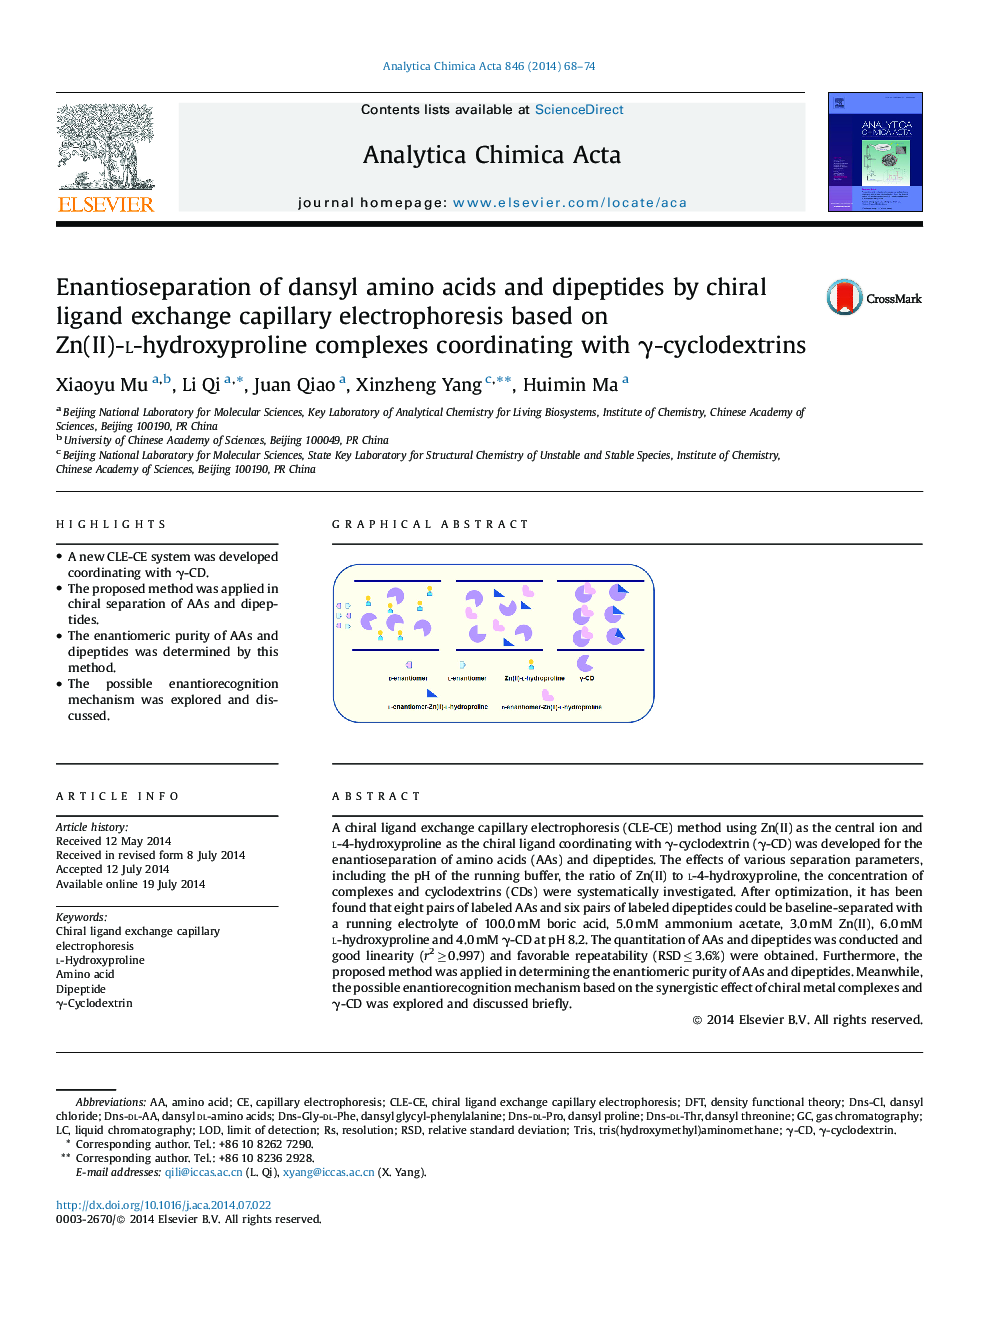 Enantioseparation of dansyl amino acids and dipeptides by chiral ligand exchange capillary electrophoresis based on Zn(II)-l-hydroxyproline complexes coordinating with γ-cyclodextrins